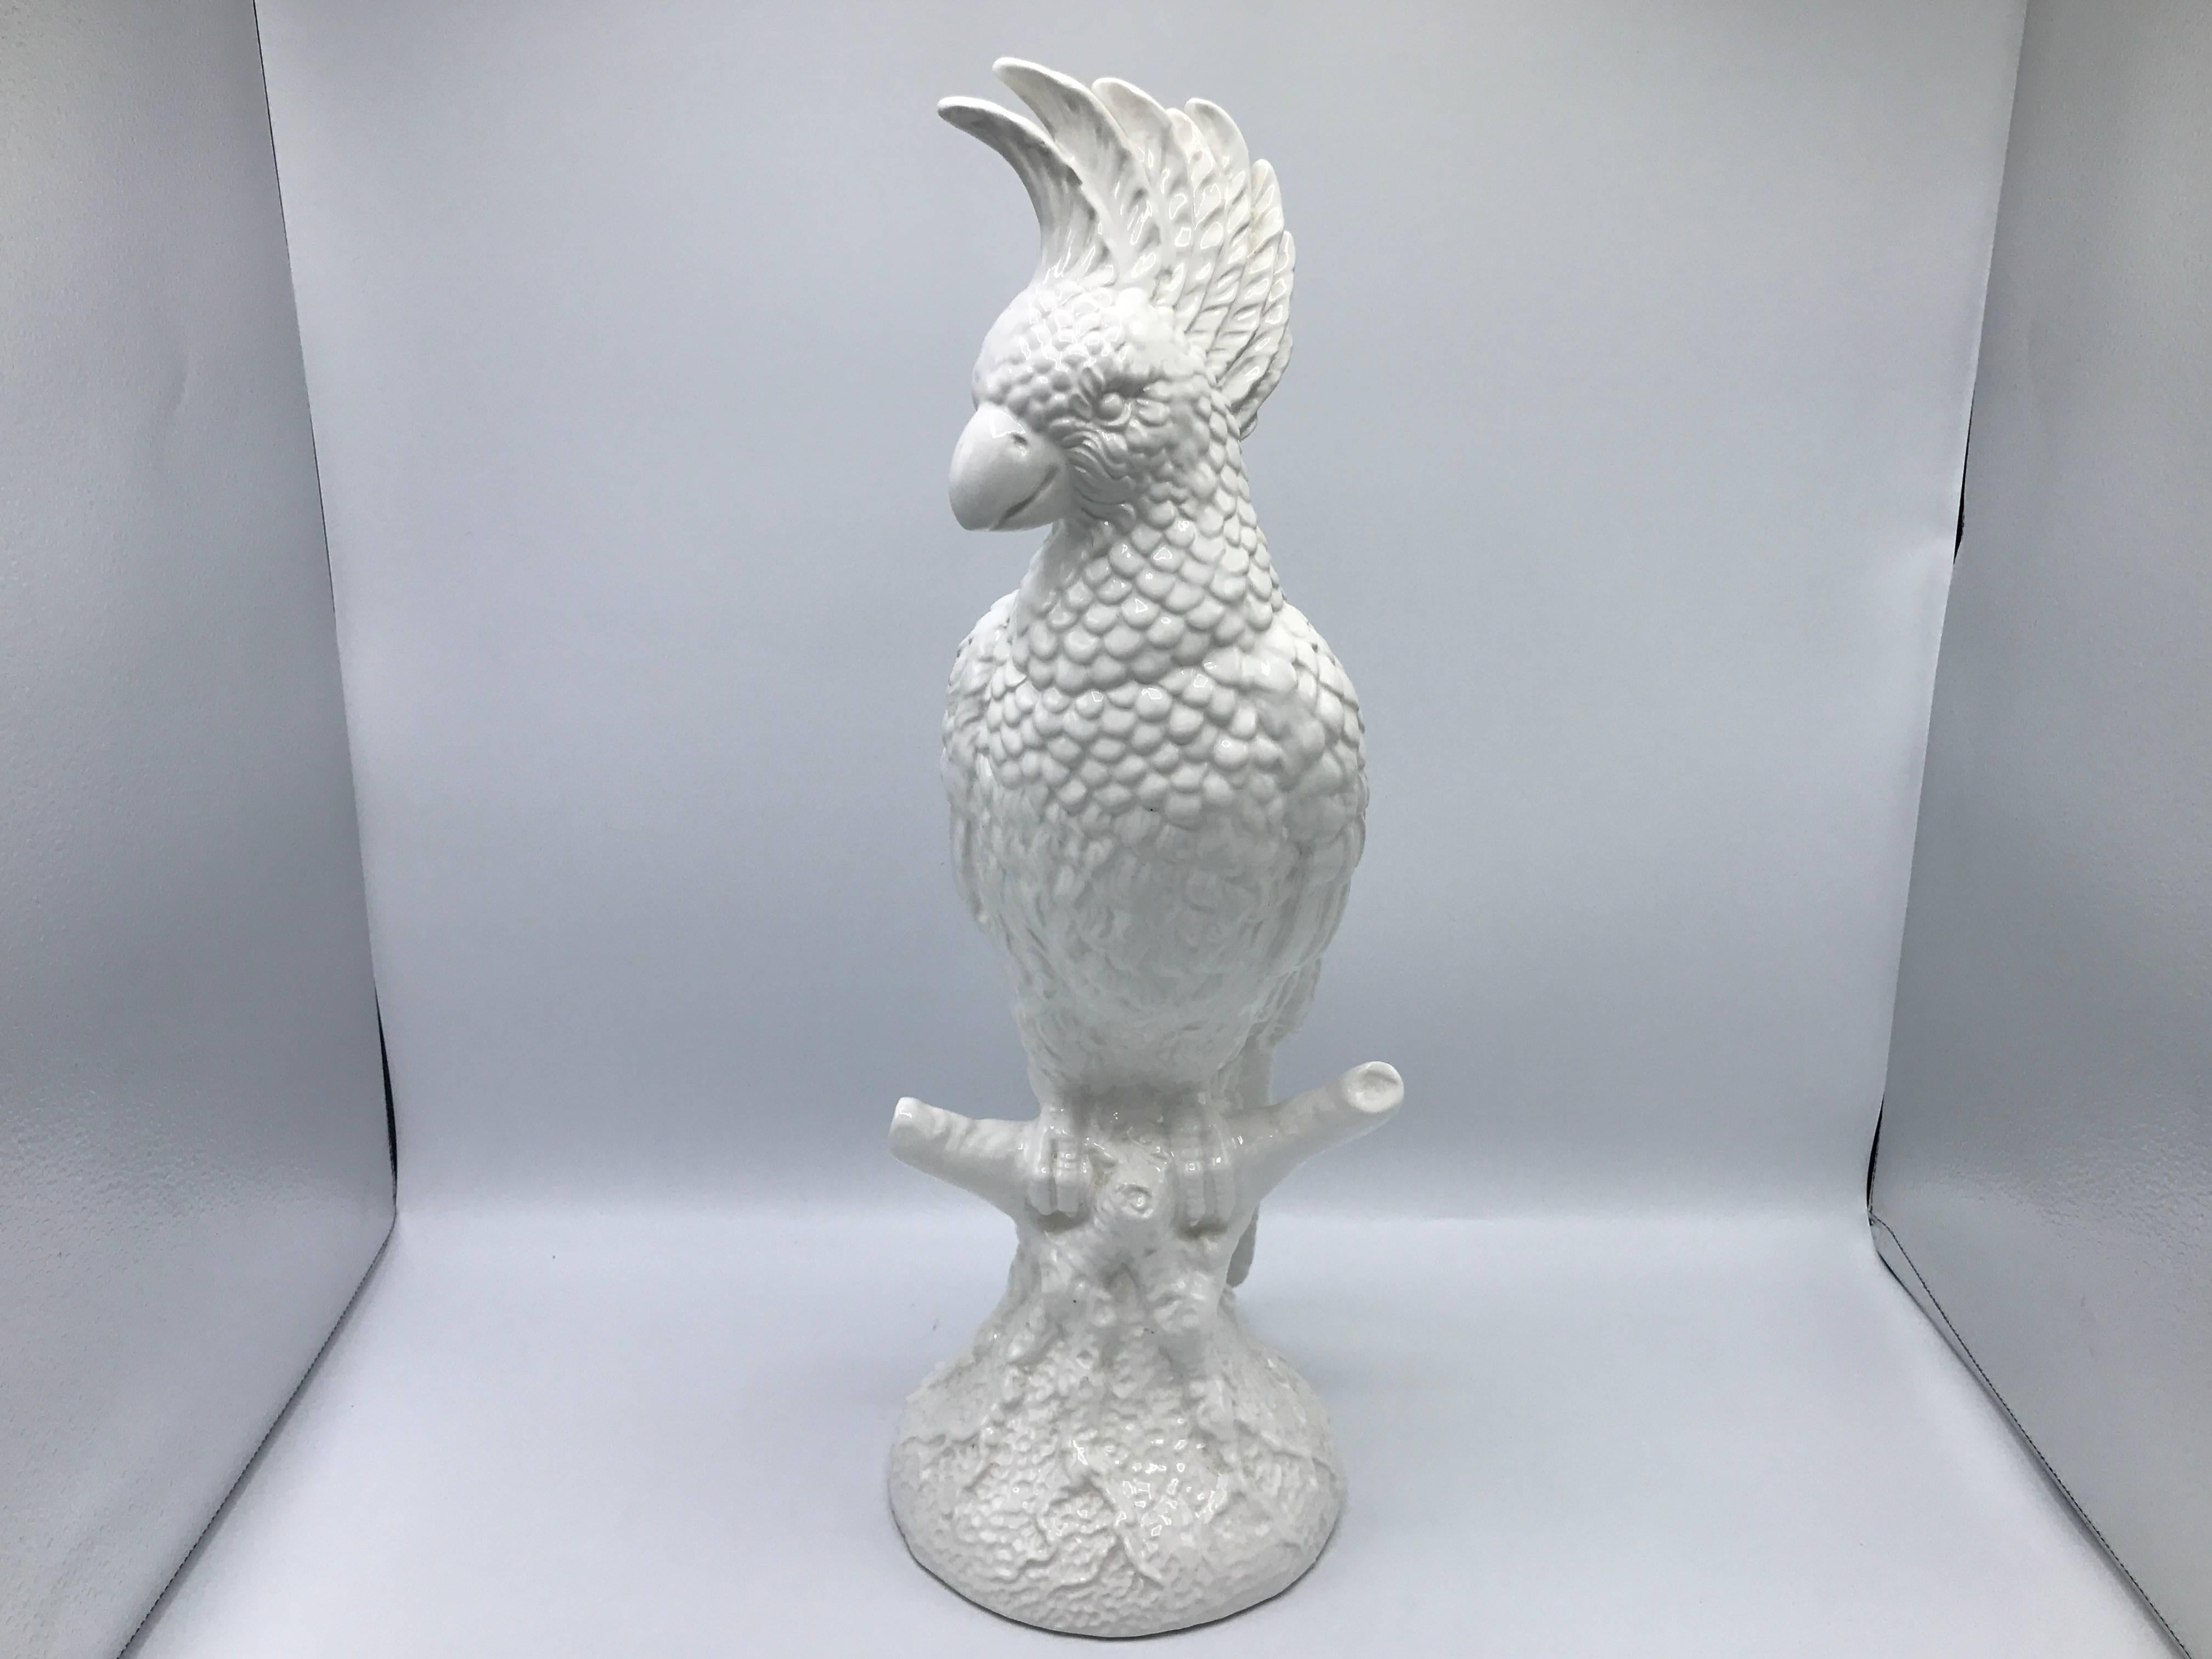 Offered is a stunning, 1960s Blanc de Chine, large cockatoo statue. The piece stands 20.5